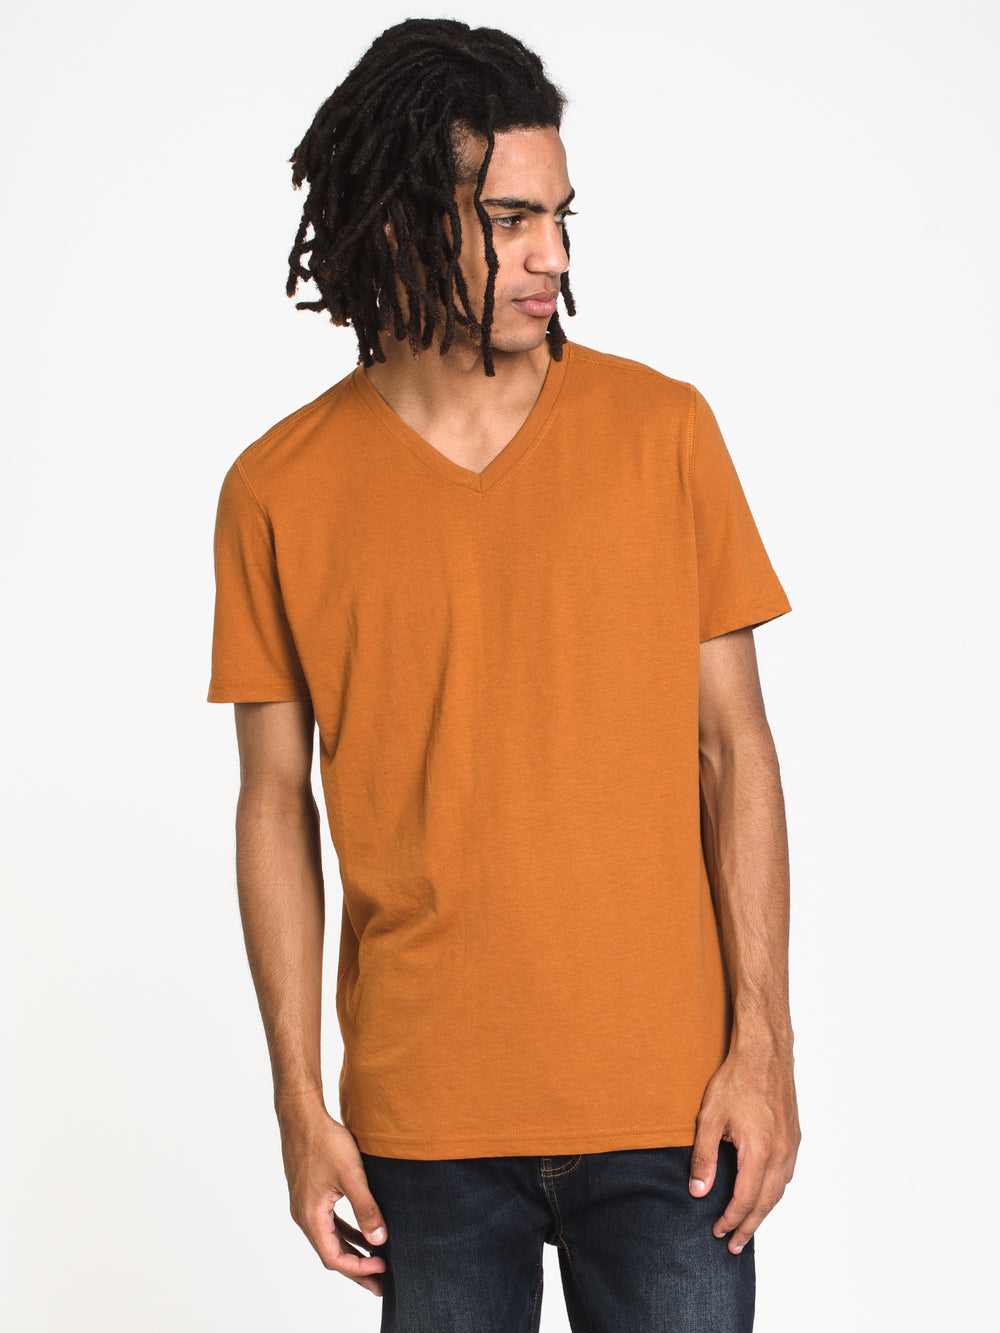 MENS VICTOR V NECK - COCOA - CLEARANCE